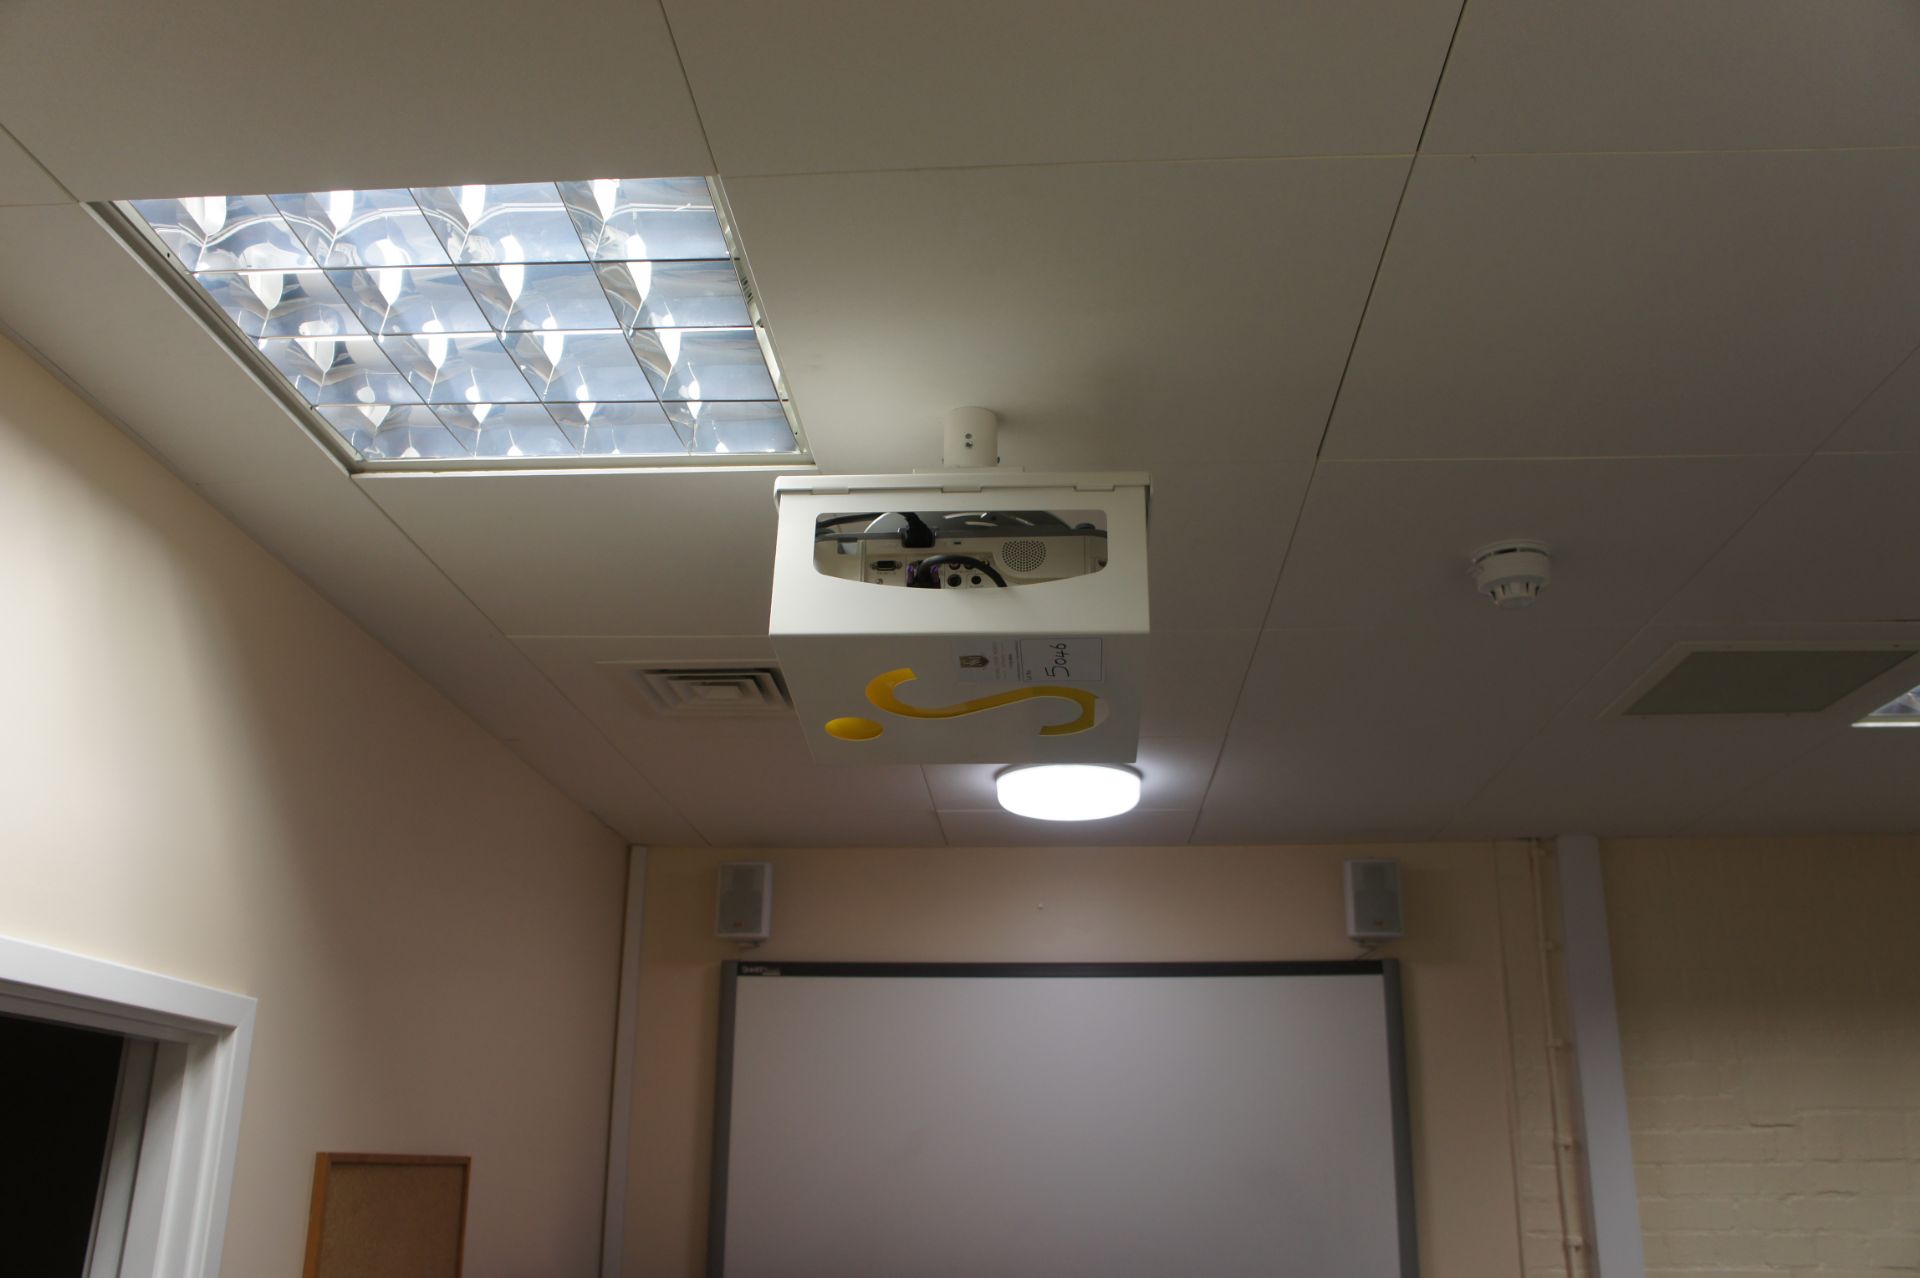 NEC Projector - Image 2 of 4